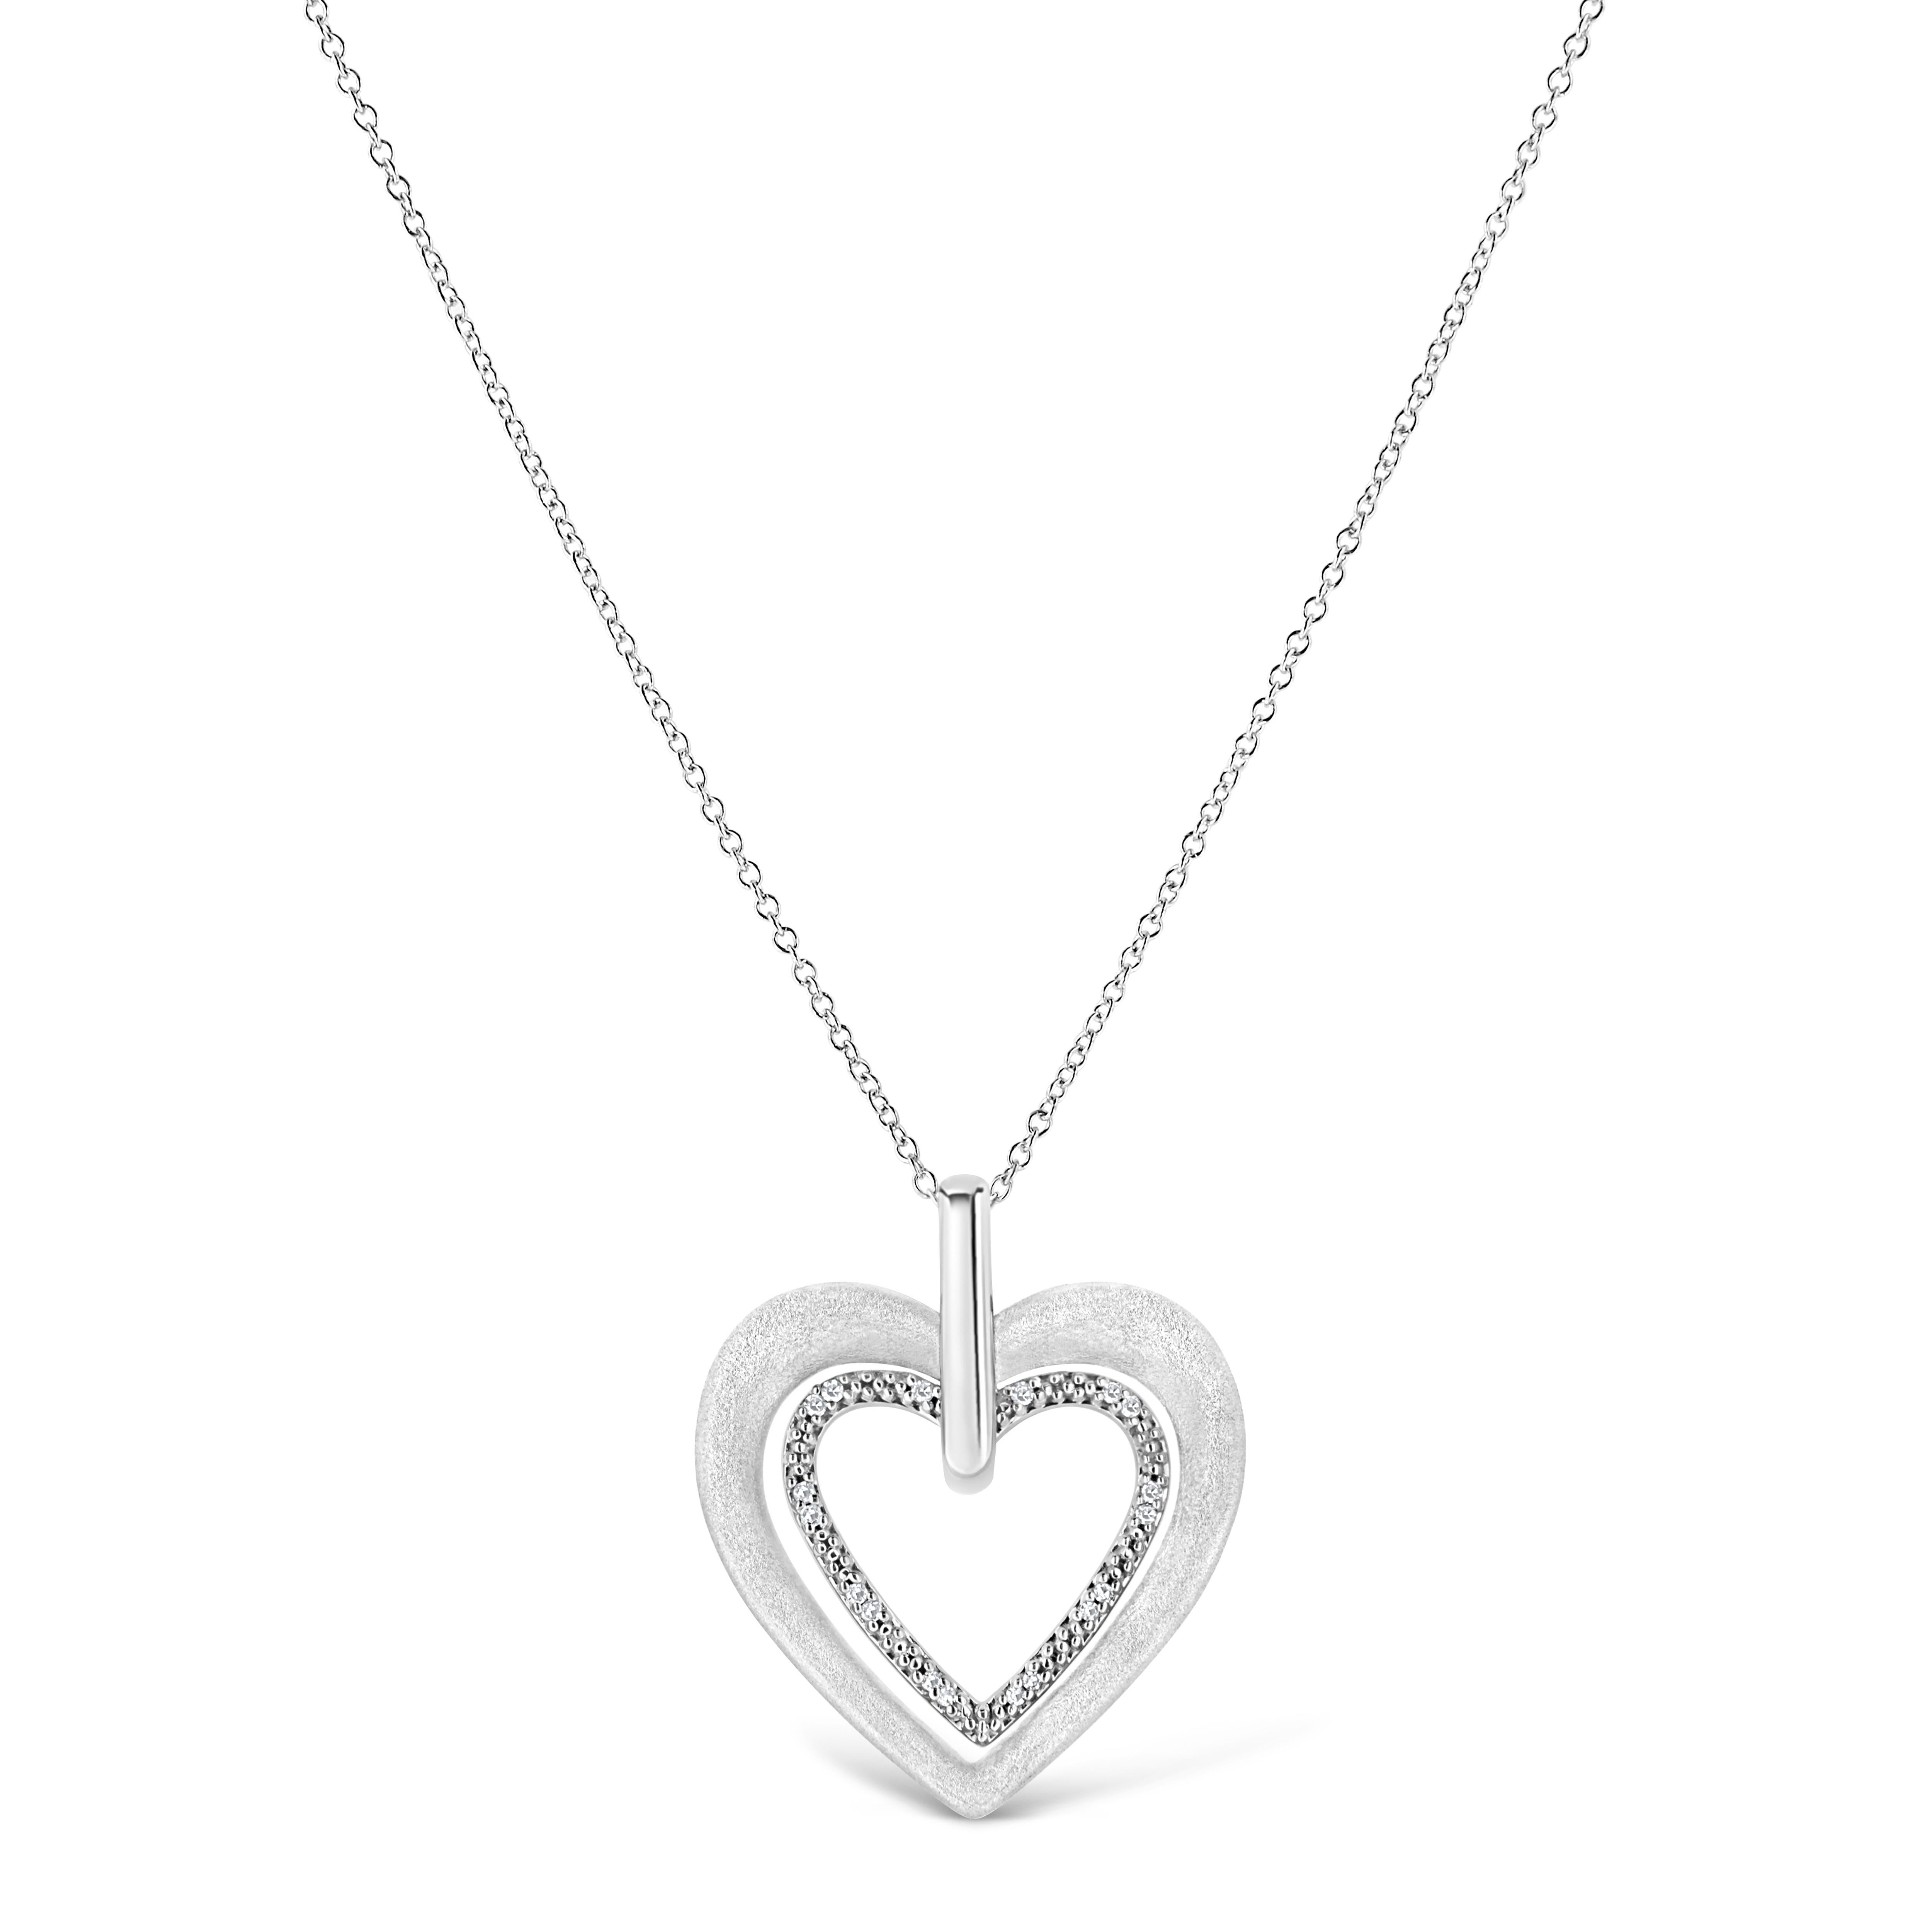 Let this heart shape diamond pendant symbolizes your unconditional love for her. Fashioned in luminous sterling silver this pendant showcasing 18 sparkling prong set single cut diamonds, set on heart motif and dangles from a shimmering cable chain.